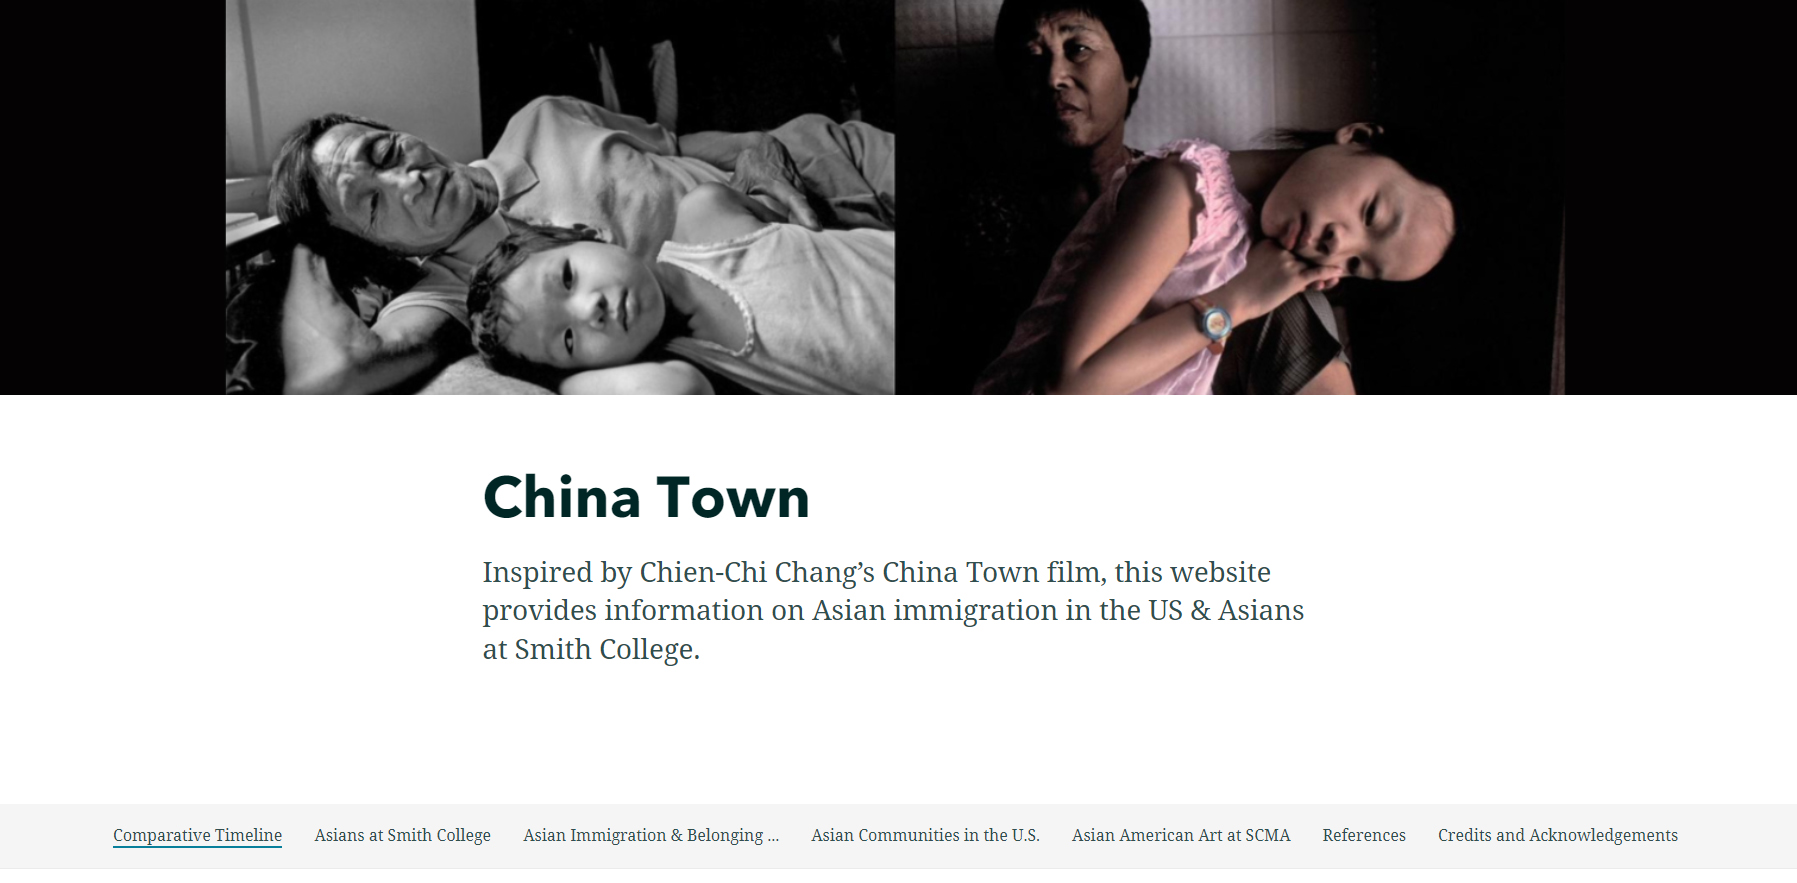 Screenshot of two photos side by side in horizontal layout; one left a black and white photo of older Asian woman lying next to a young girl; on right color photo of of middle-aged Asian woman with a pre-teen girl; China Town along with the following text underneath, Inspired by Chien-Chi Chang's China Town film, this website provides information on Asian immigration in the US & Asians at Smith College.